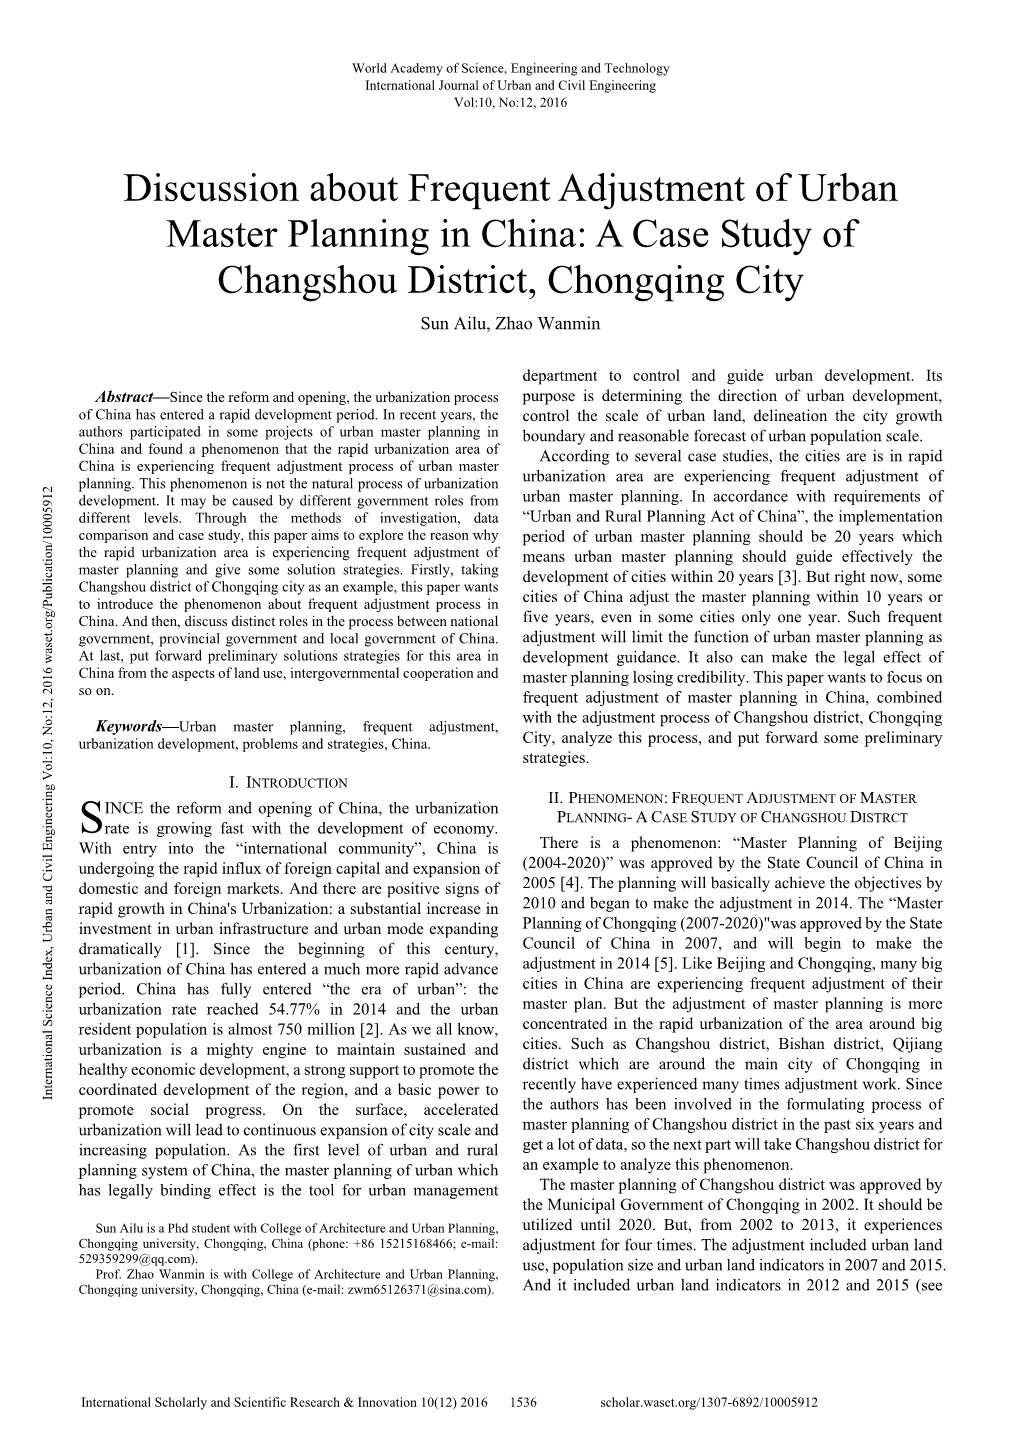 Discussion About Frequent Adjustment of Urban Master Planning in China: a Case Study of Changshou District, Chongqing City Sun Ailu, Zhao Wanmin